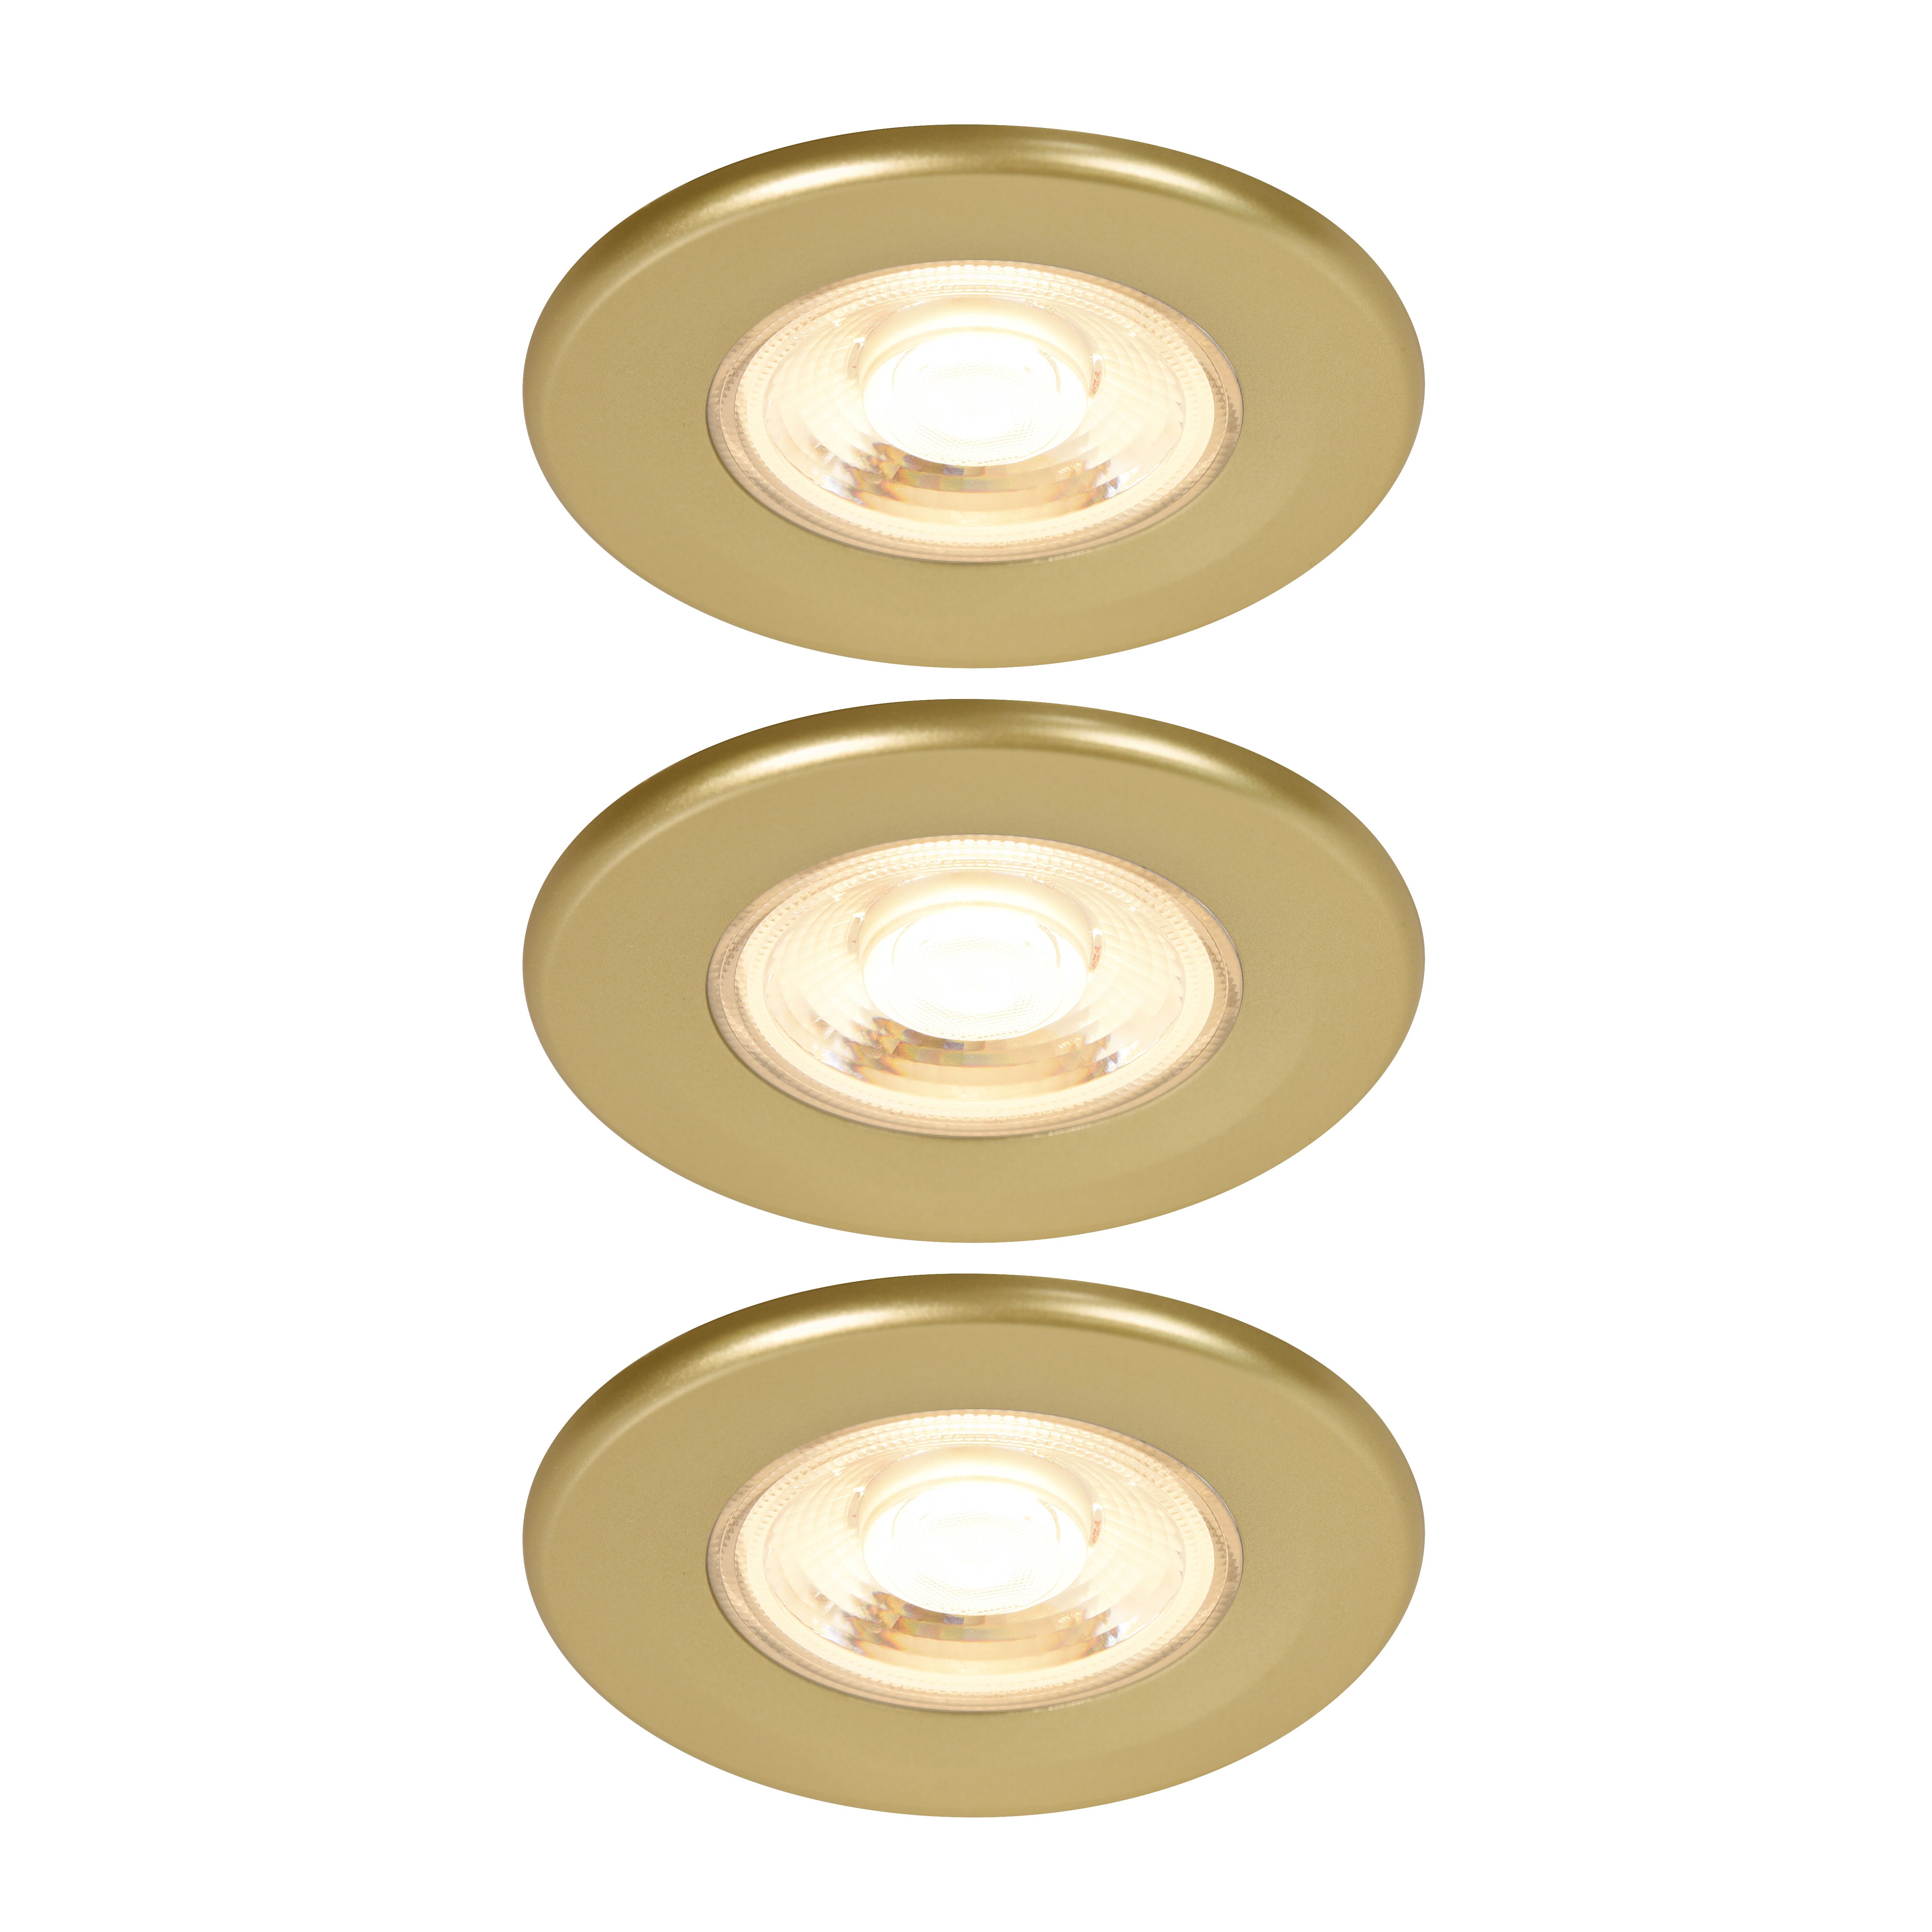 Gamow Matt Gold effect Fixed LED Fire-rated Warm & neutral Downlight 5W IP65, Pack of 3